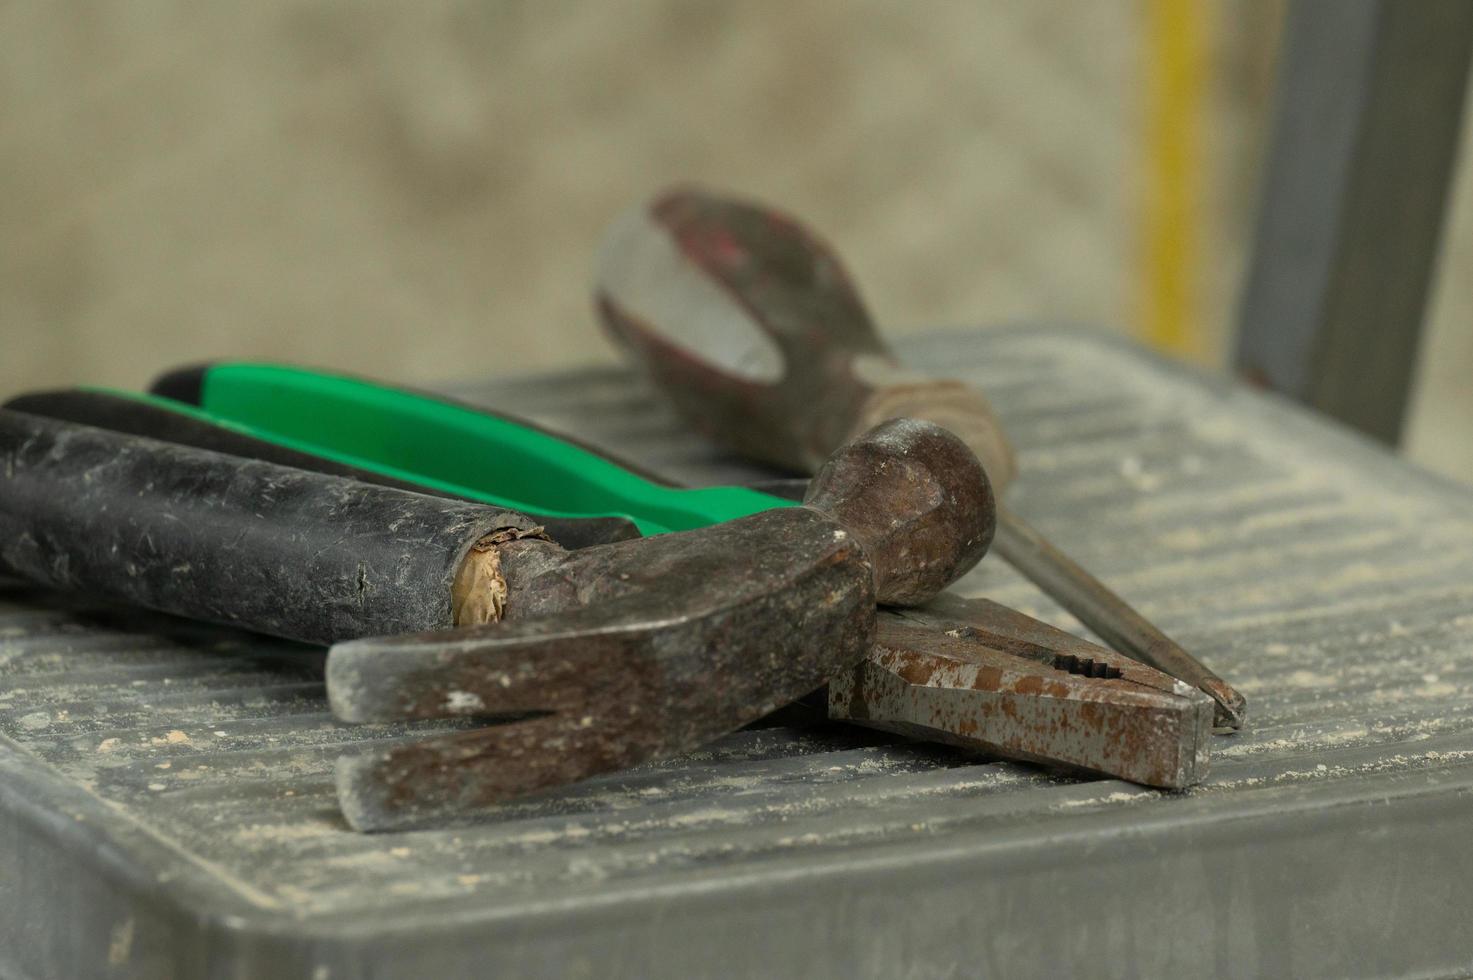 Set of three construction tools on a ladder hammer, pliers and screwdriver. photo